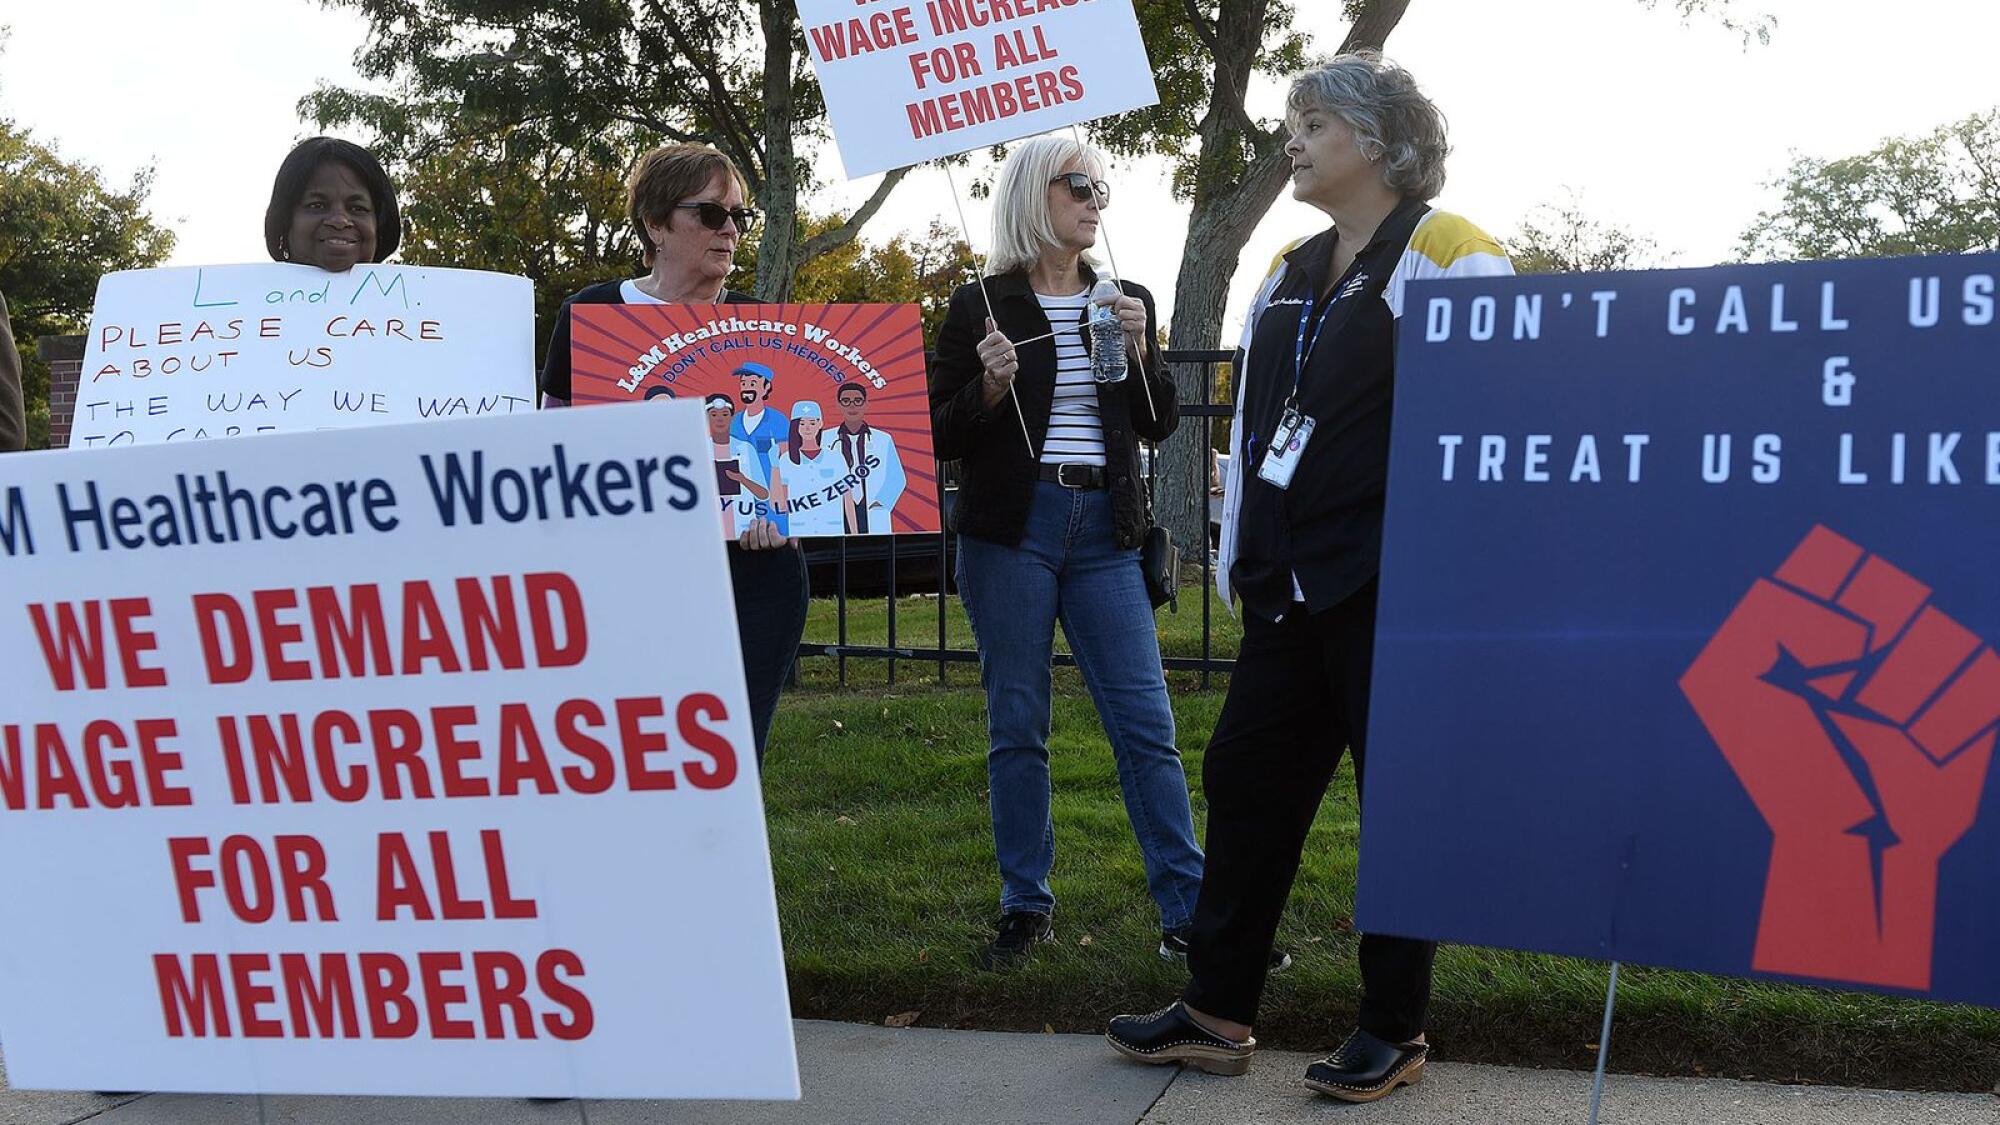 Hospital workers protest for better staffing, wages